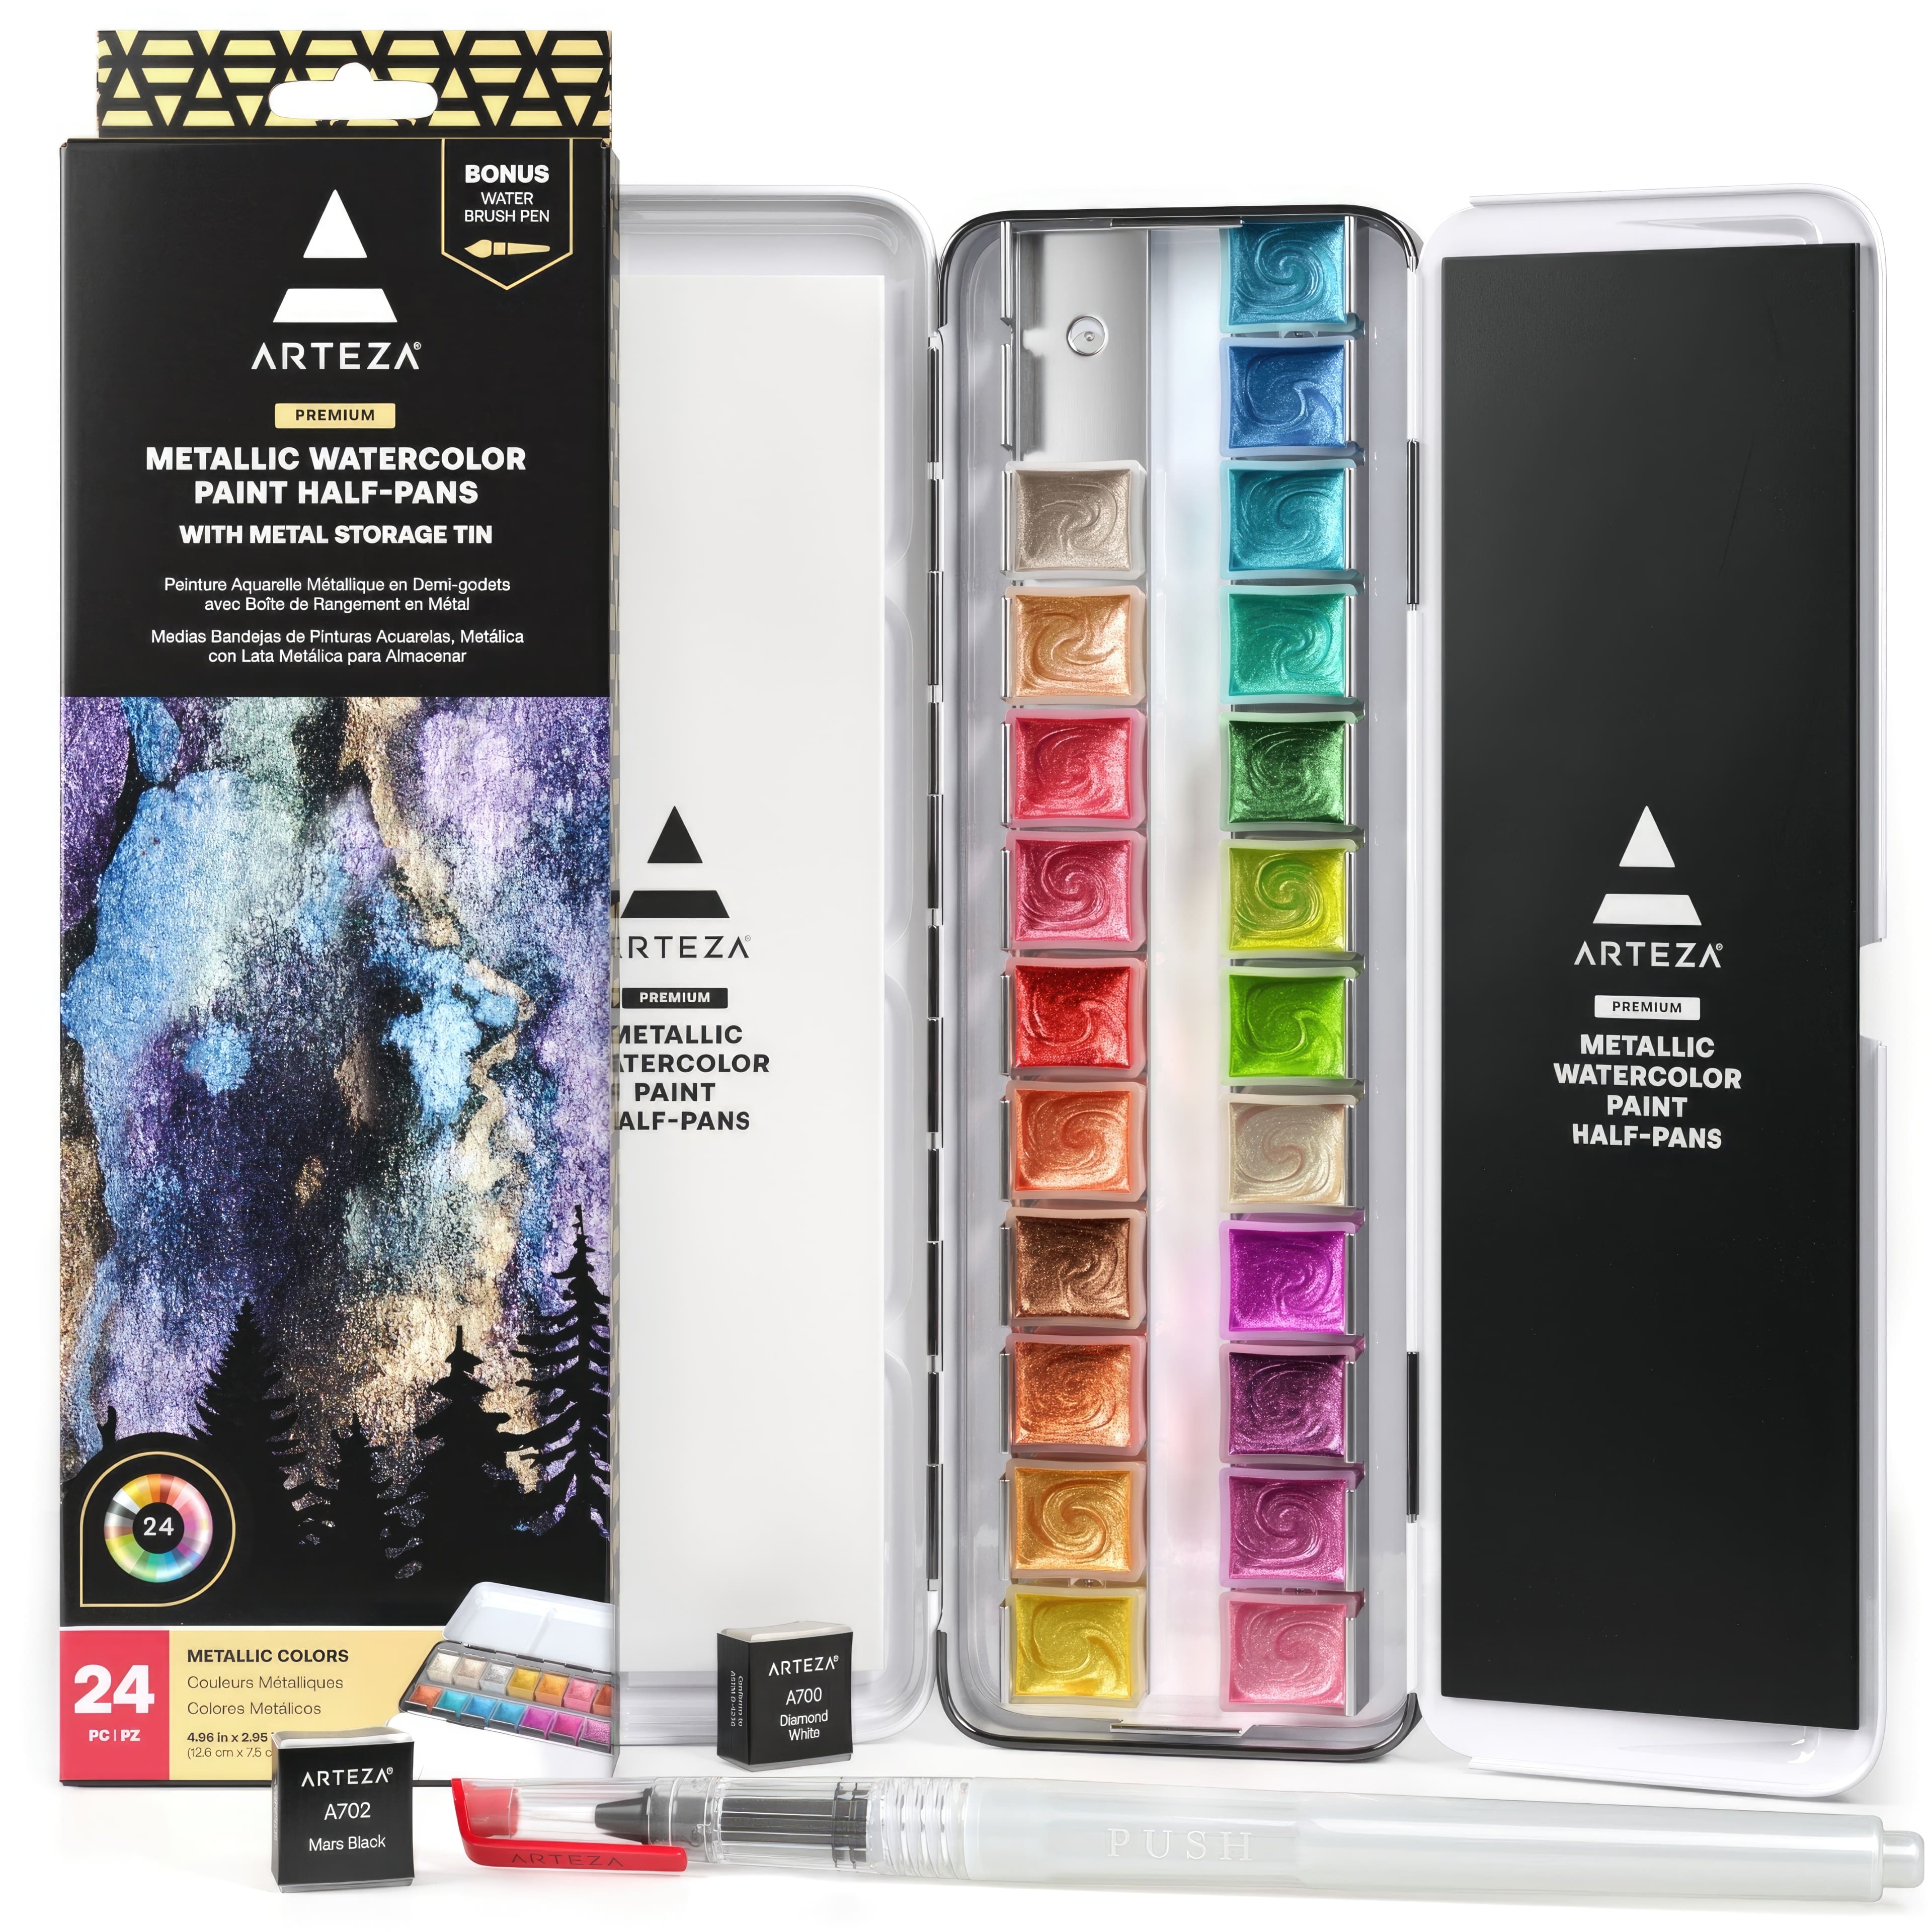  VILLCASE 3 Sets Watercolor Paint Set Suits Watercolors for  Adults Travel Set Beginner Watercolor Set Kit for Watercolor Starter Kit  Starter Watercolor Kit Painting Supplies : Arts, Crafts & Sewing